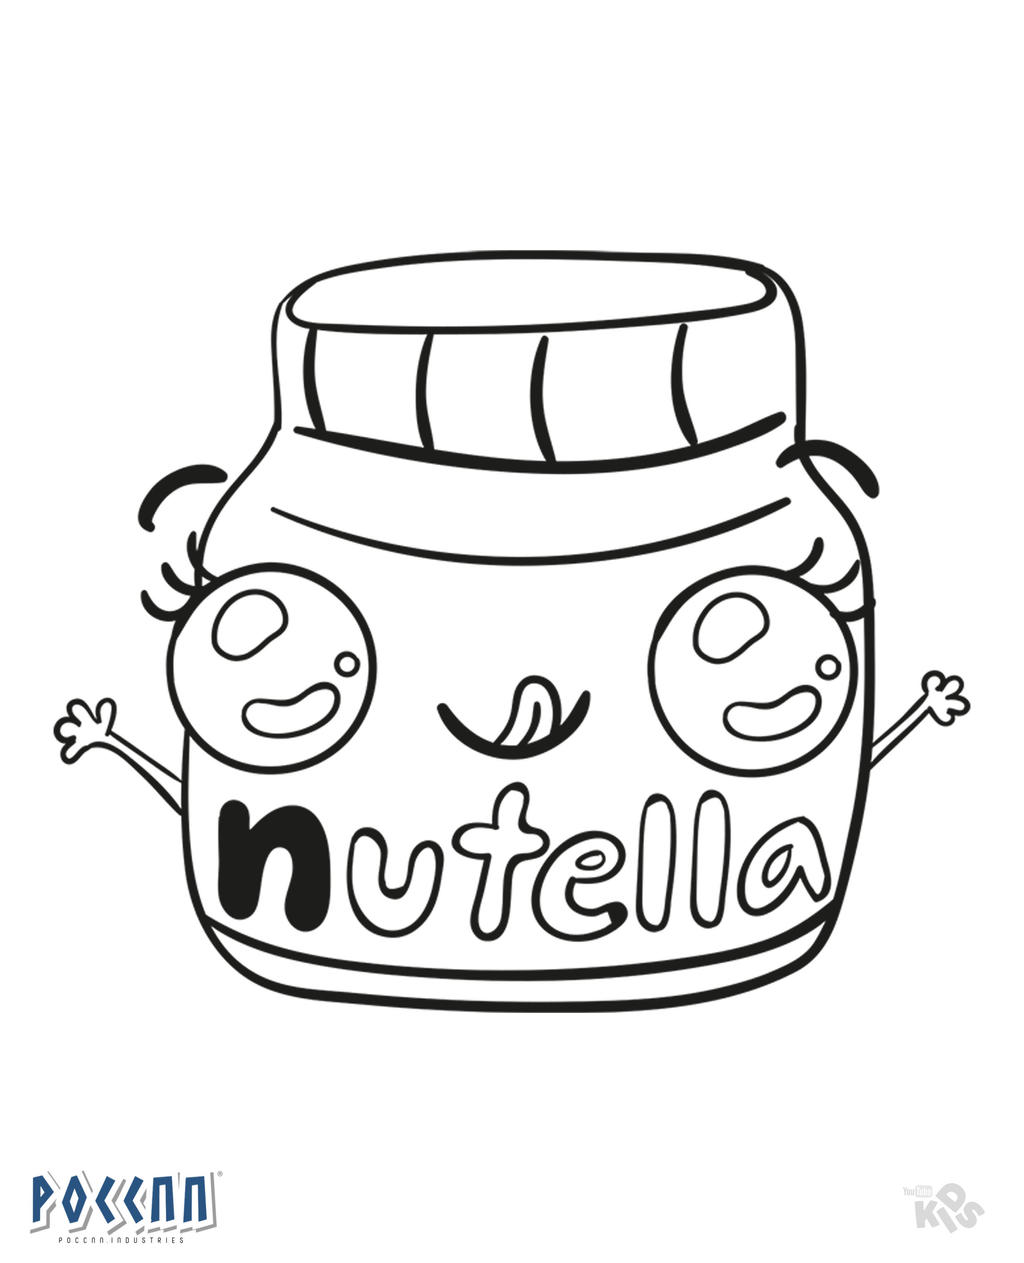 Nutella Kawaii to color Lineart by PoccnnIndustries on DeviantArt